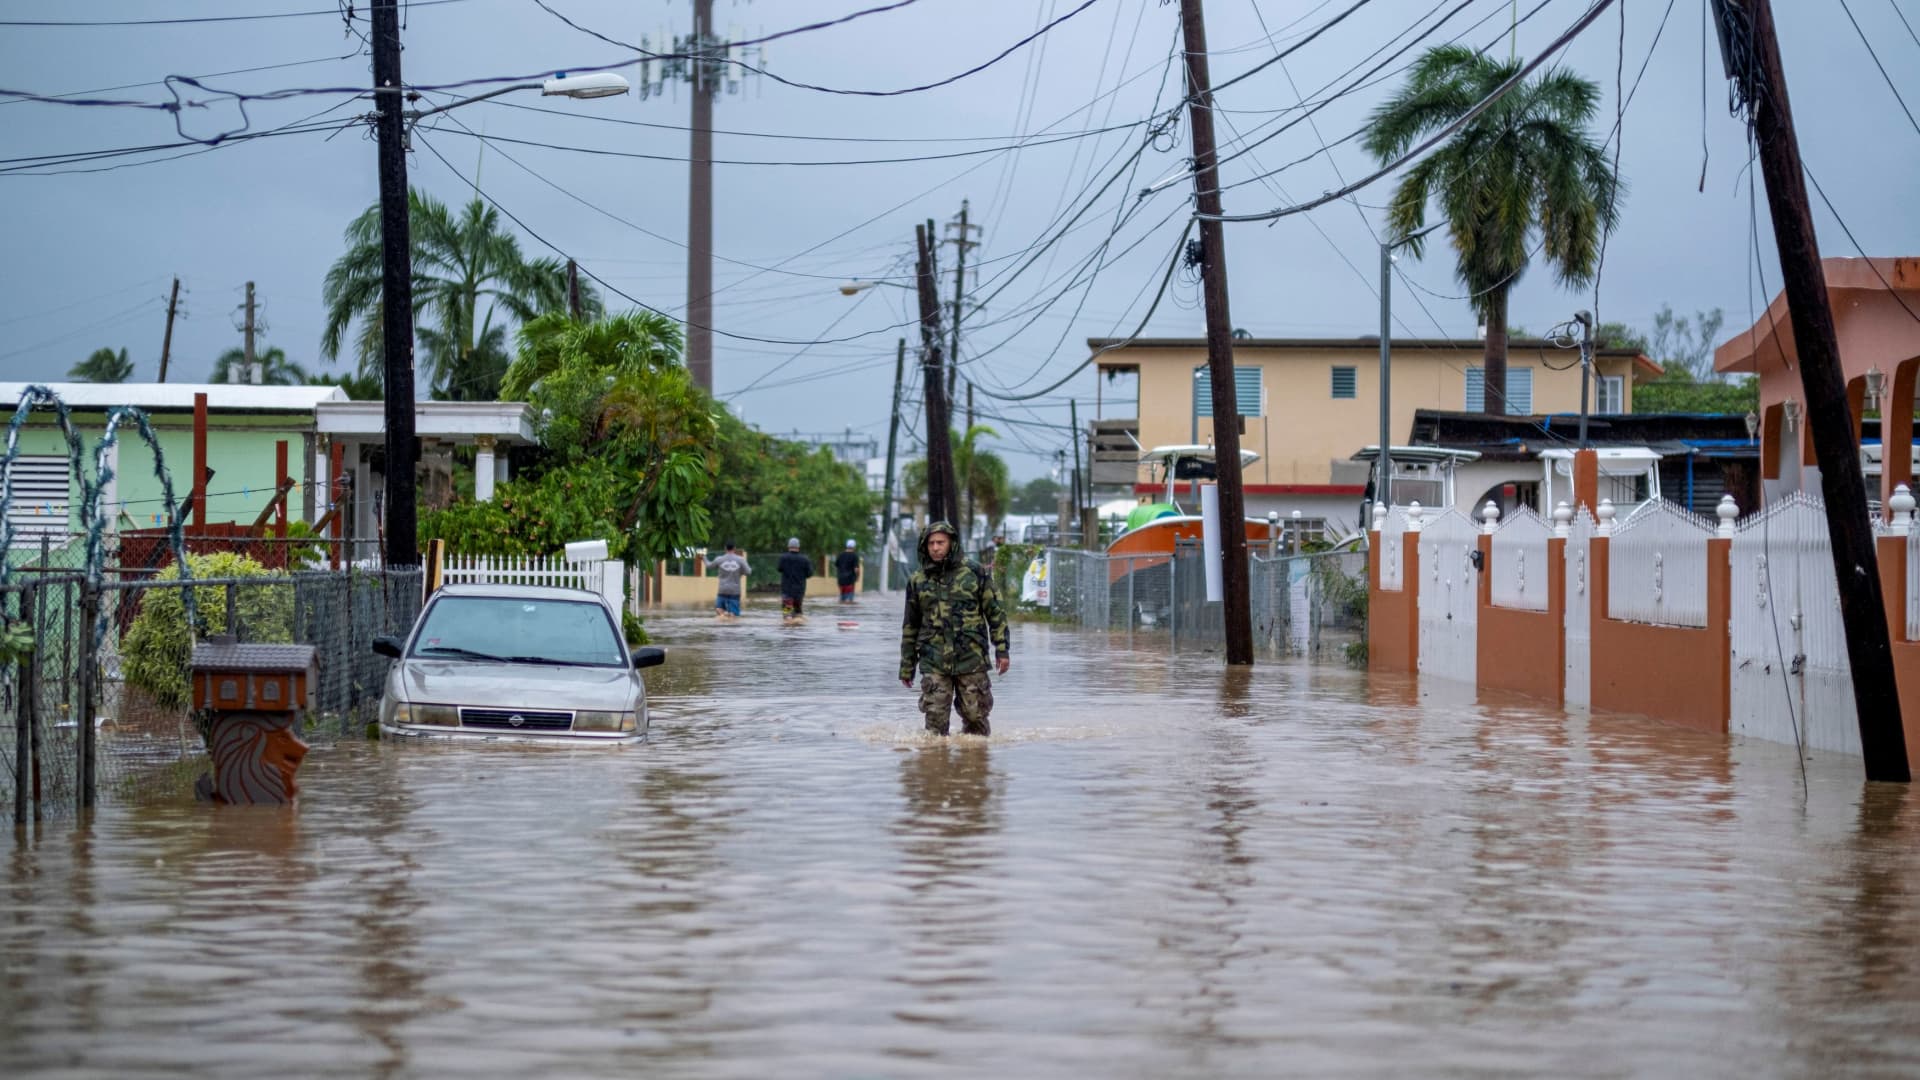 A member of the Puerto Rico National Guard wades through water in search for people to be rescued from flooded streets in the aftermath of Hurricane Fiona in Salinas, Puerto Rico September 19, 2022.